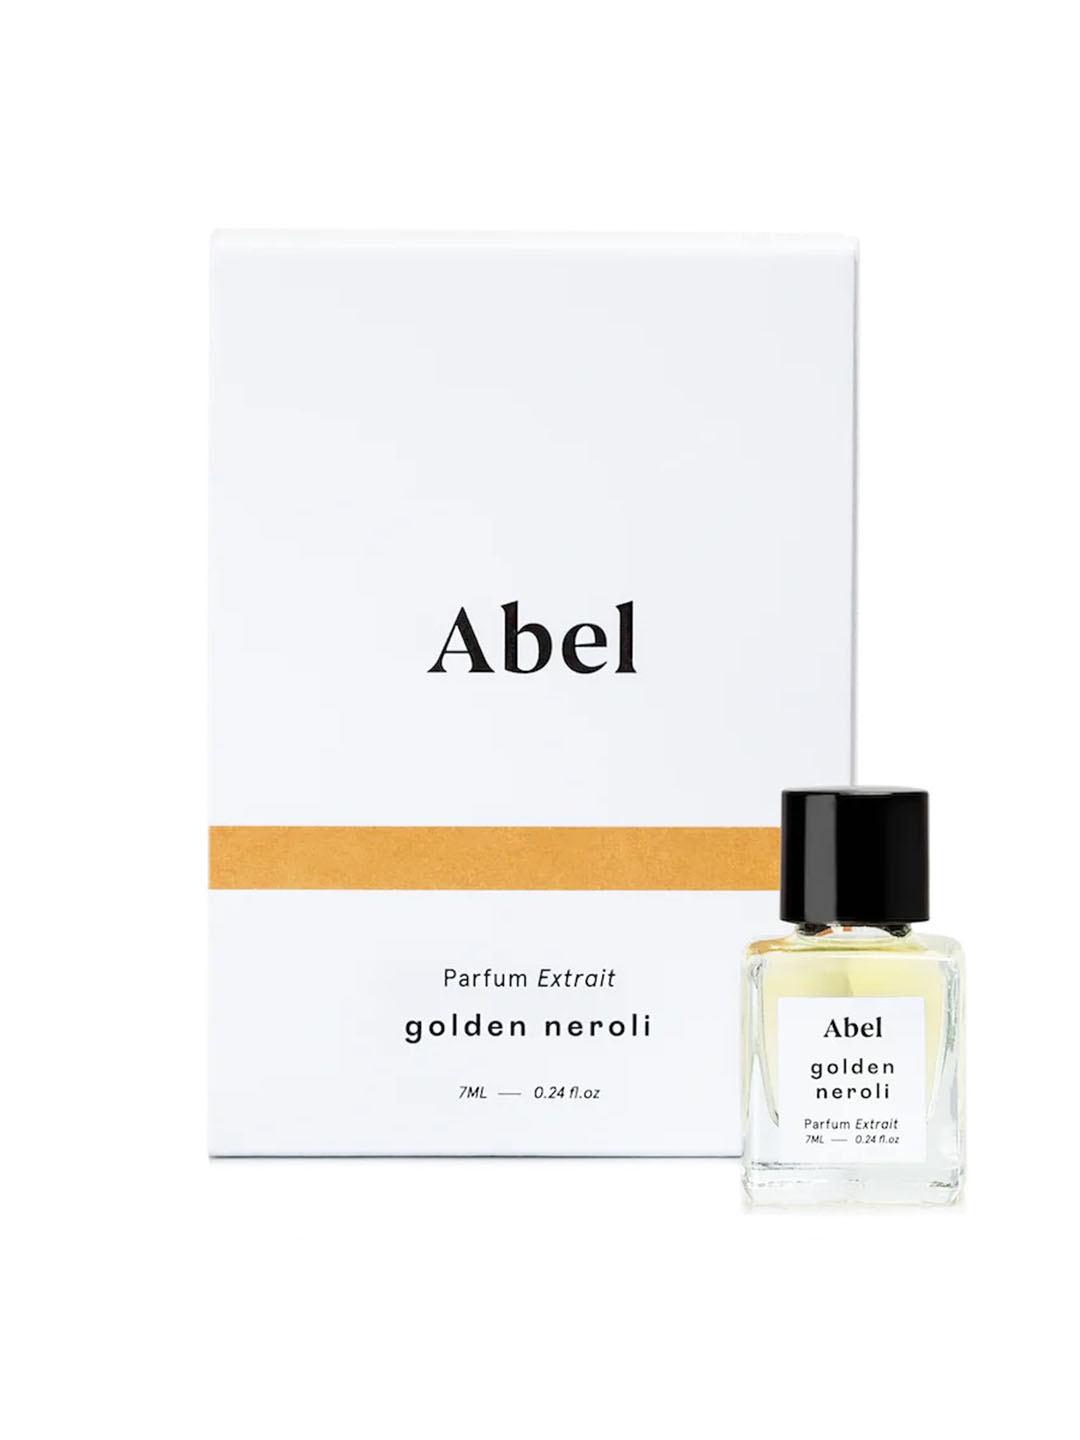 A natural bottle of Golden Neroli Parfum Extrait by Abel with a therapeutic scent.